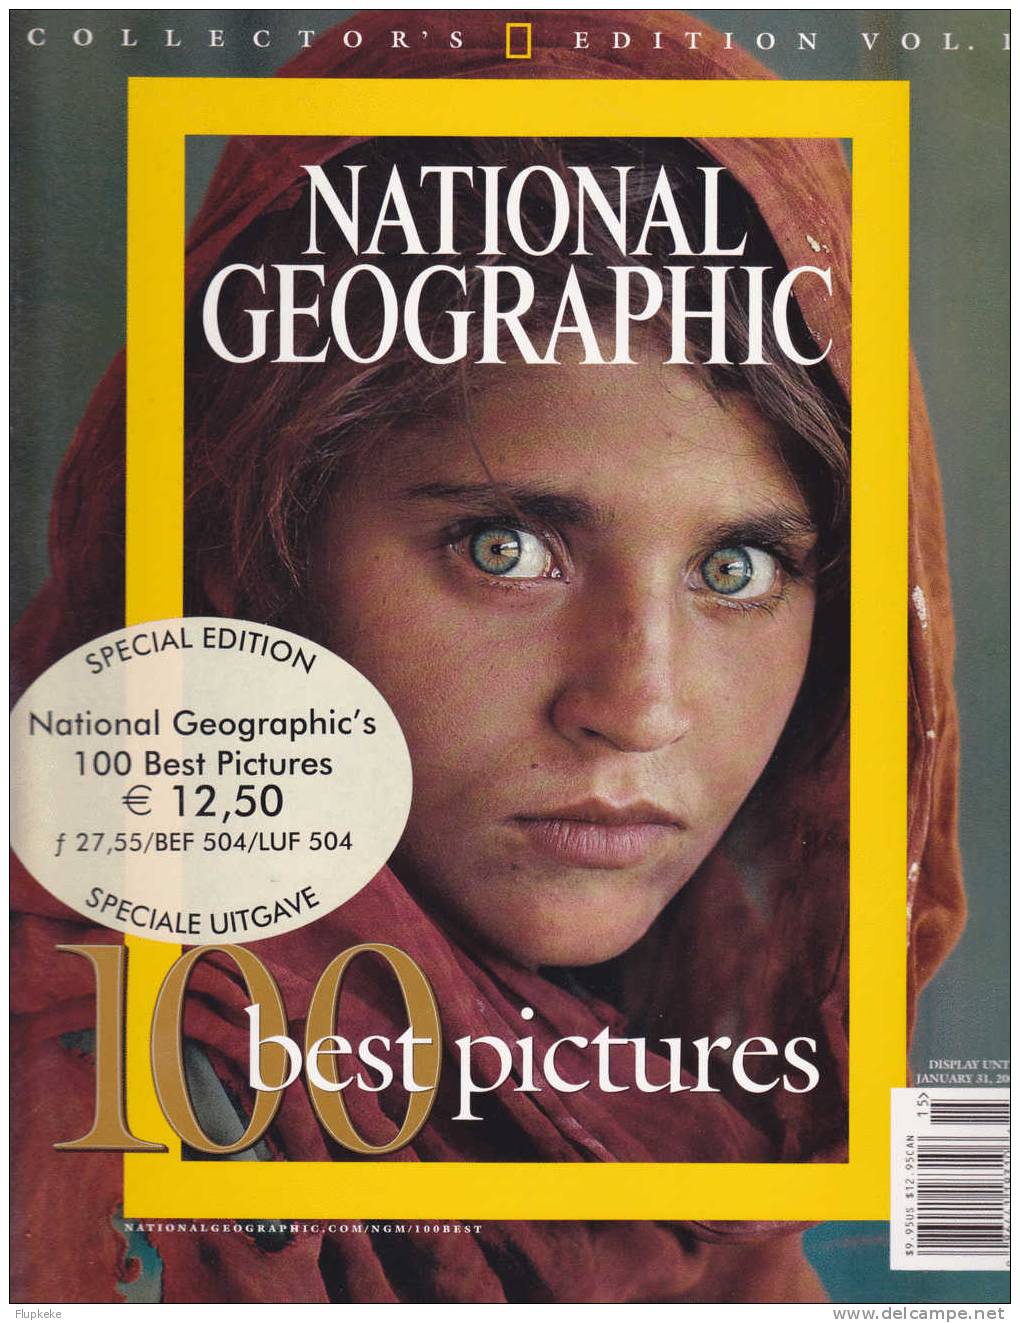 National Geographic Collector´s Edition Vol. 1 Jannuary 2002 - Voyage/ Exploration